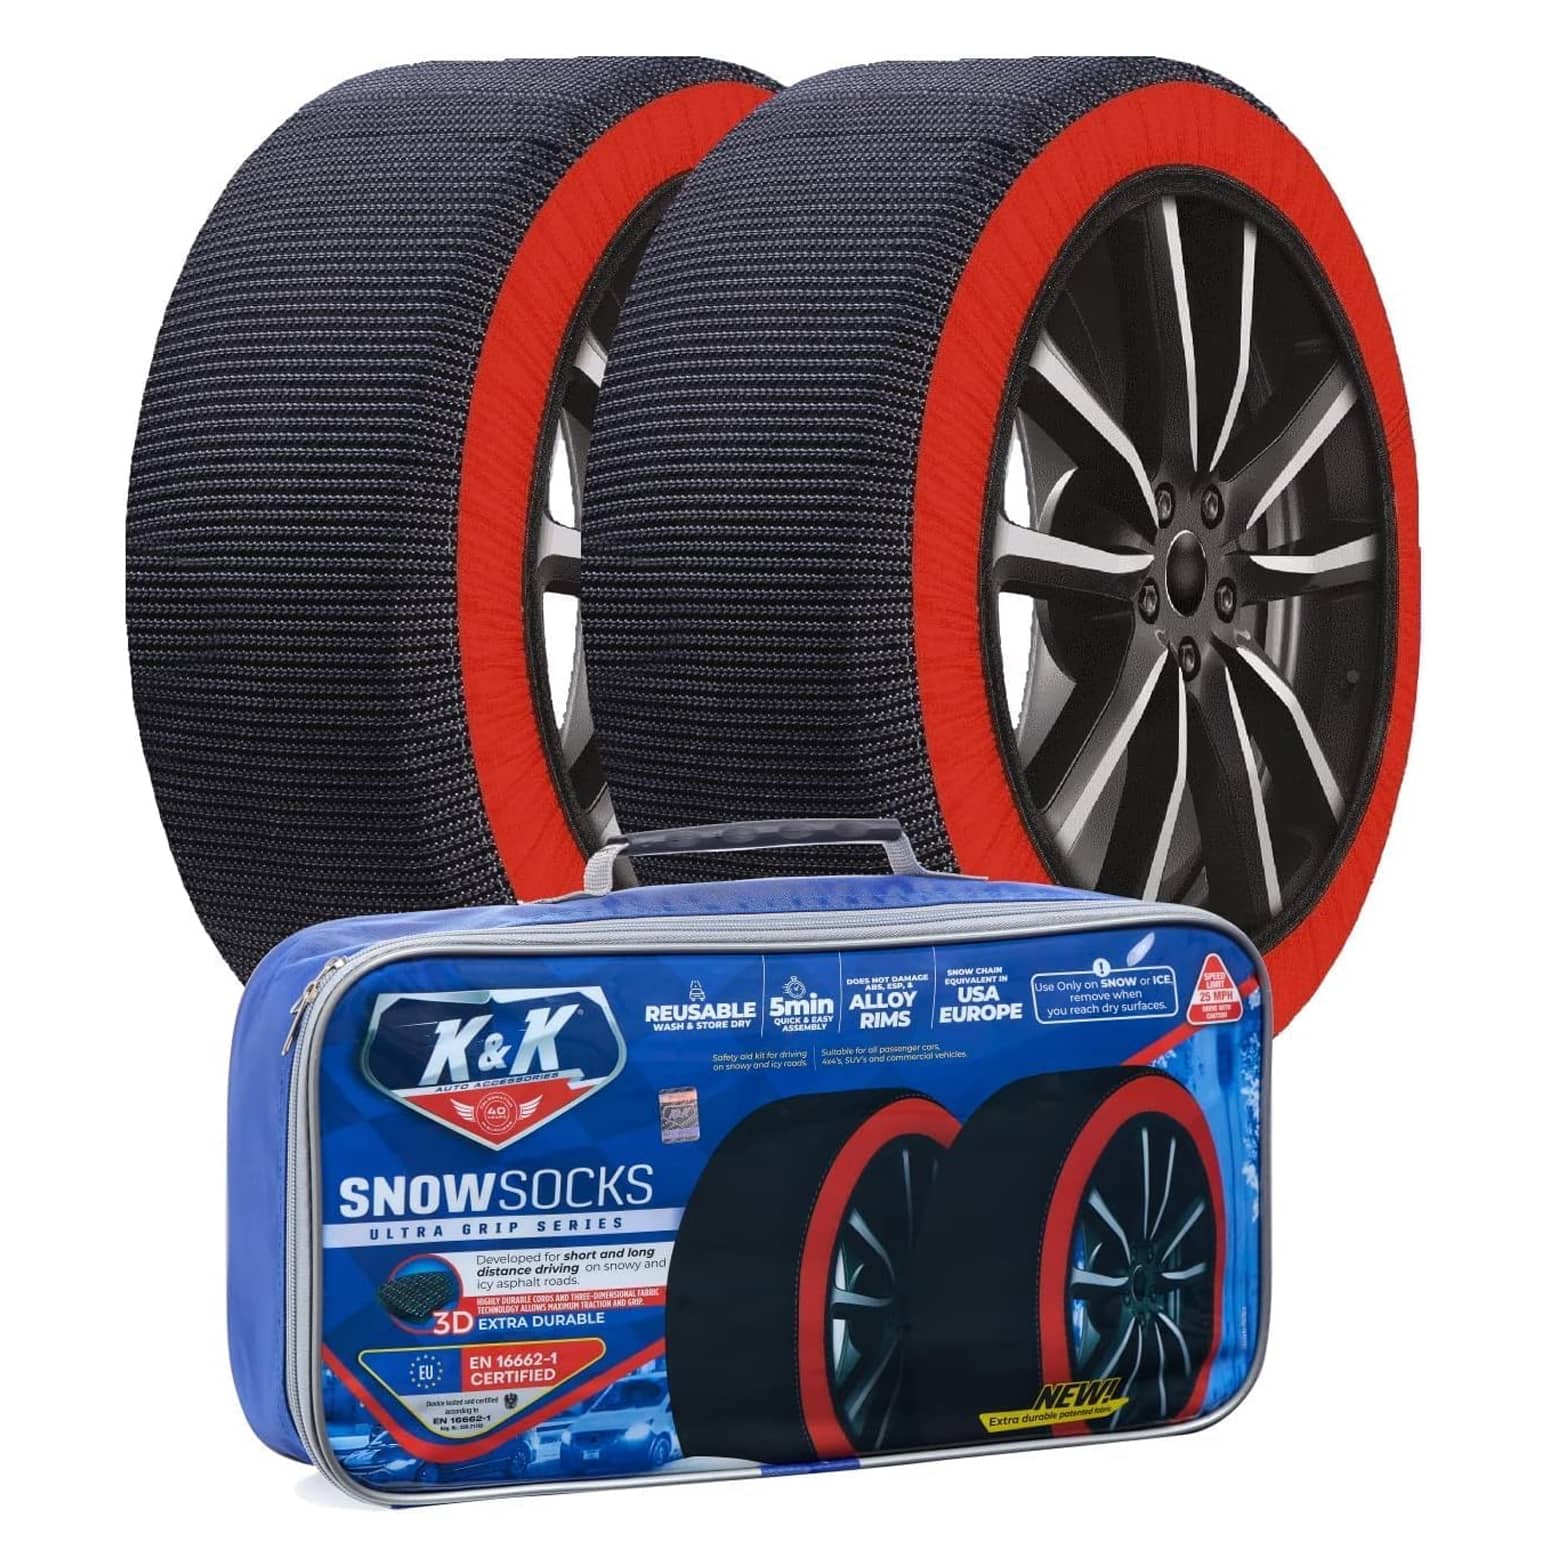 Snow Socks for Tires - The Ultimate Grip Alternative to Snow Chains